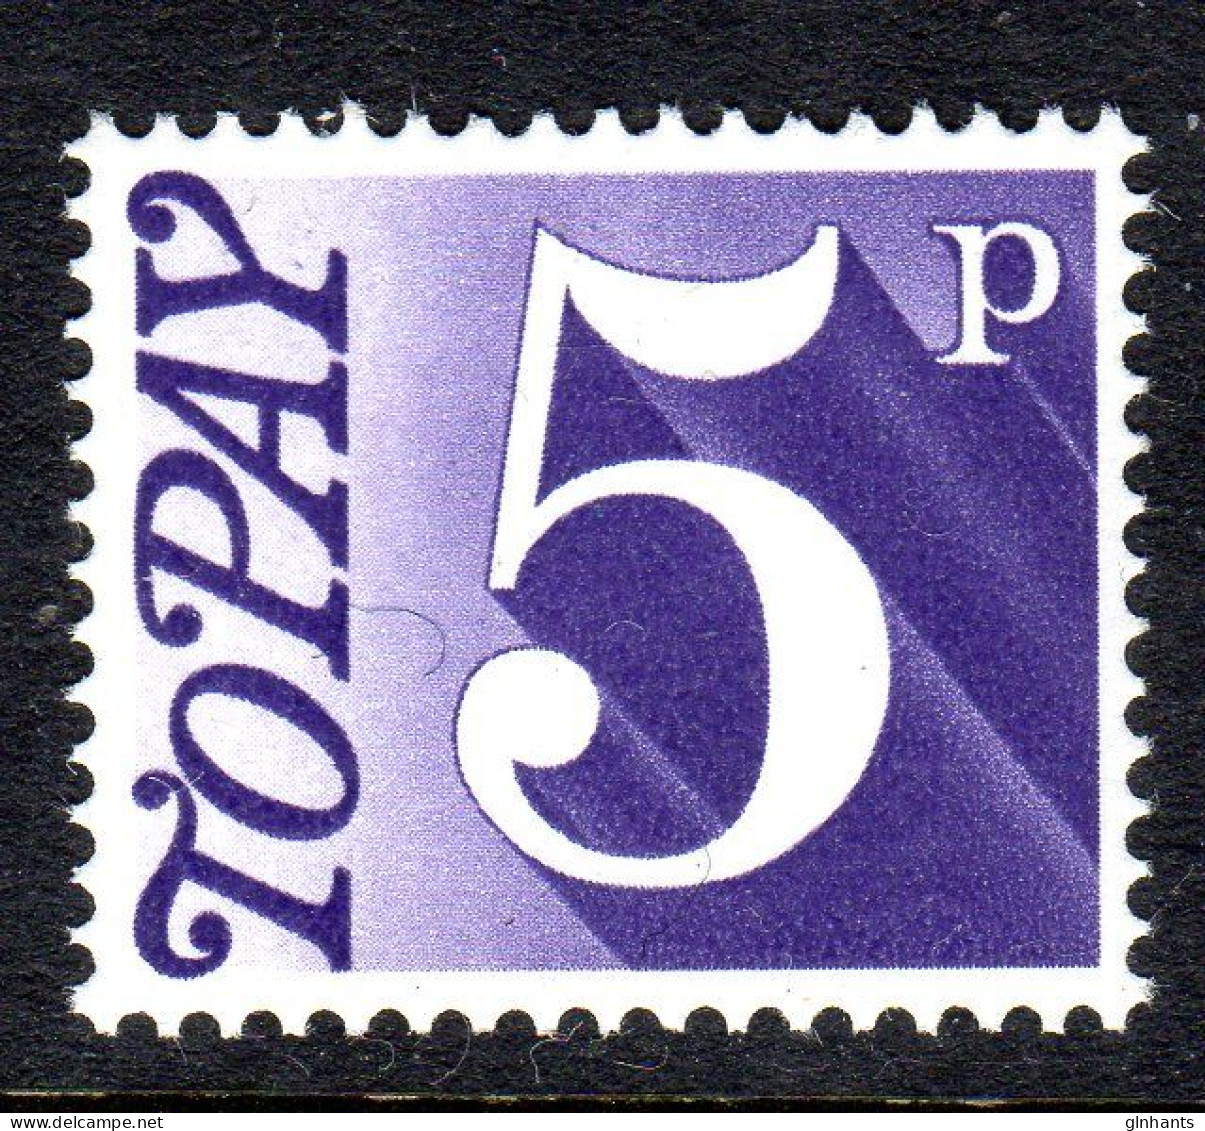 GREAT BRITAIN GB - 1970 POSTAGE DUE 5p STAMP FINE MNH ** SG D82 - Taxe